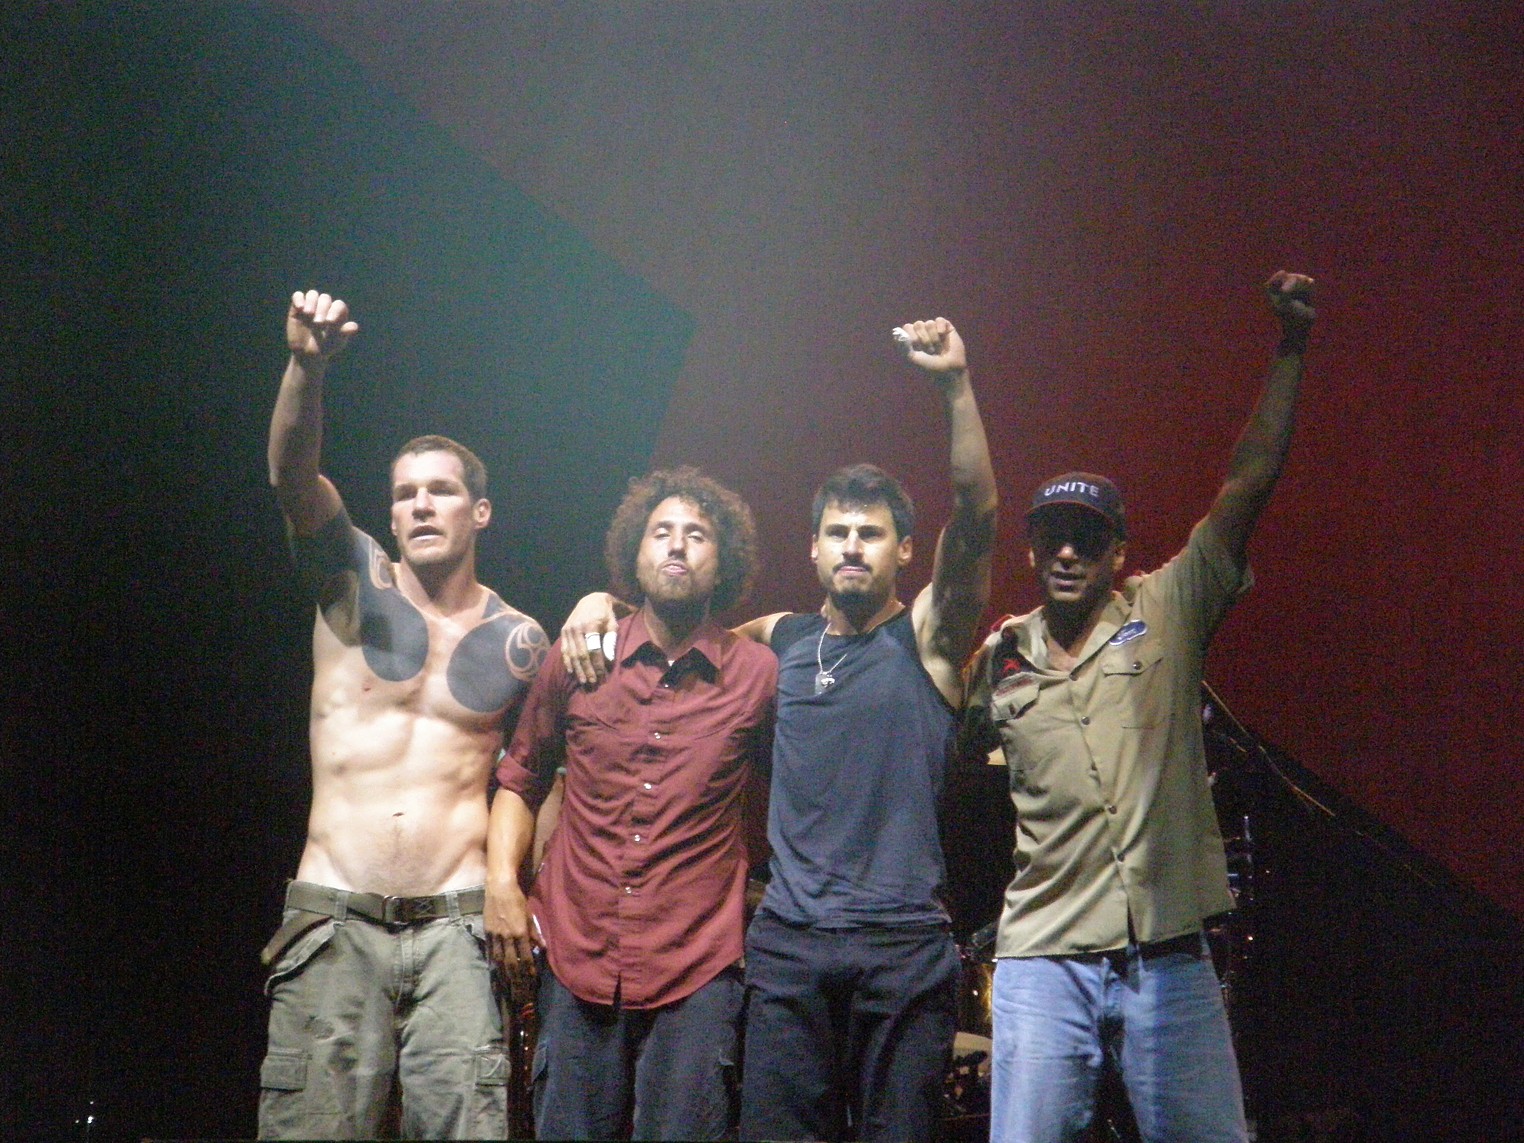 Rage Against the Machine have just canceled their 2023 Phoenix shows